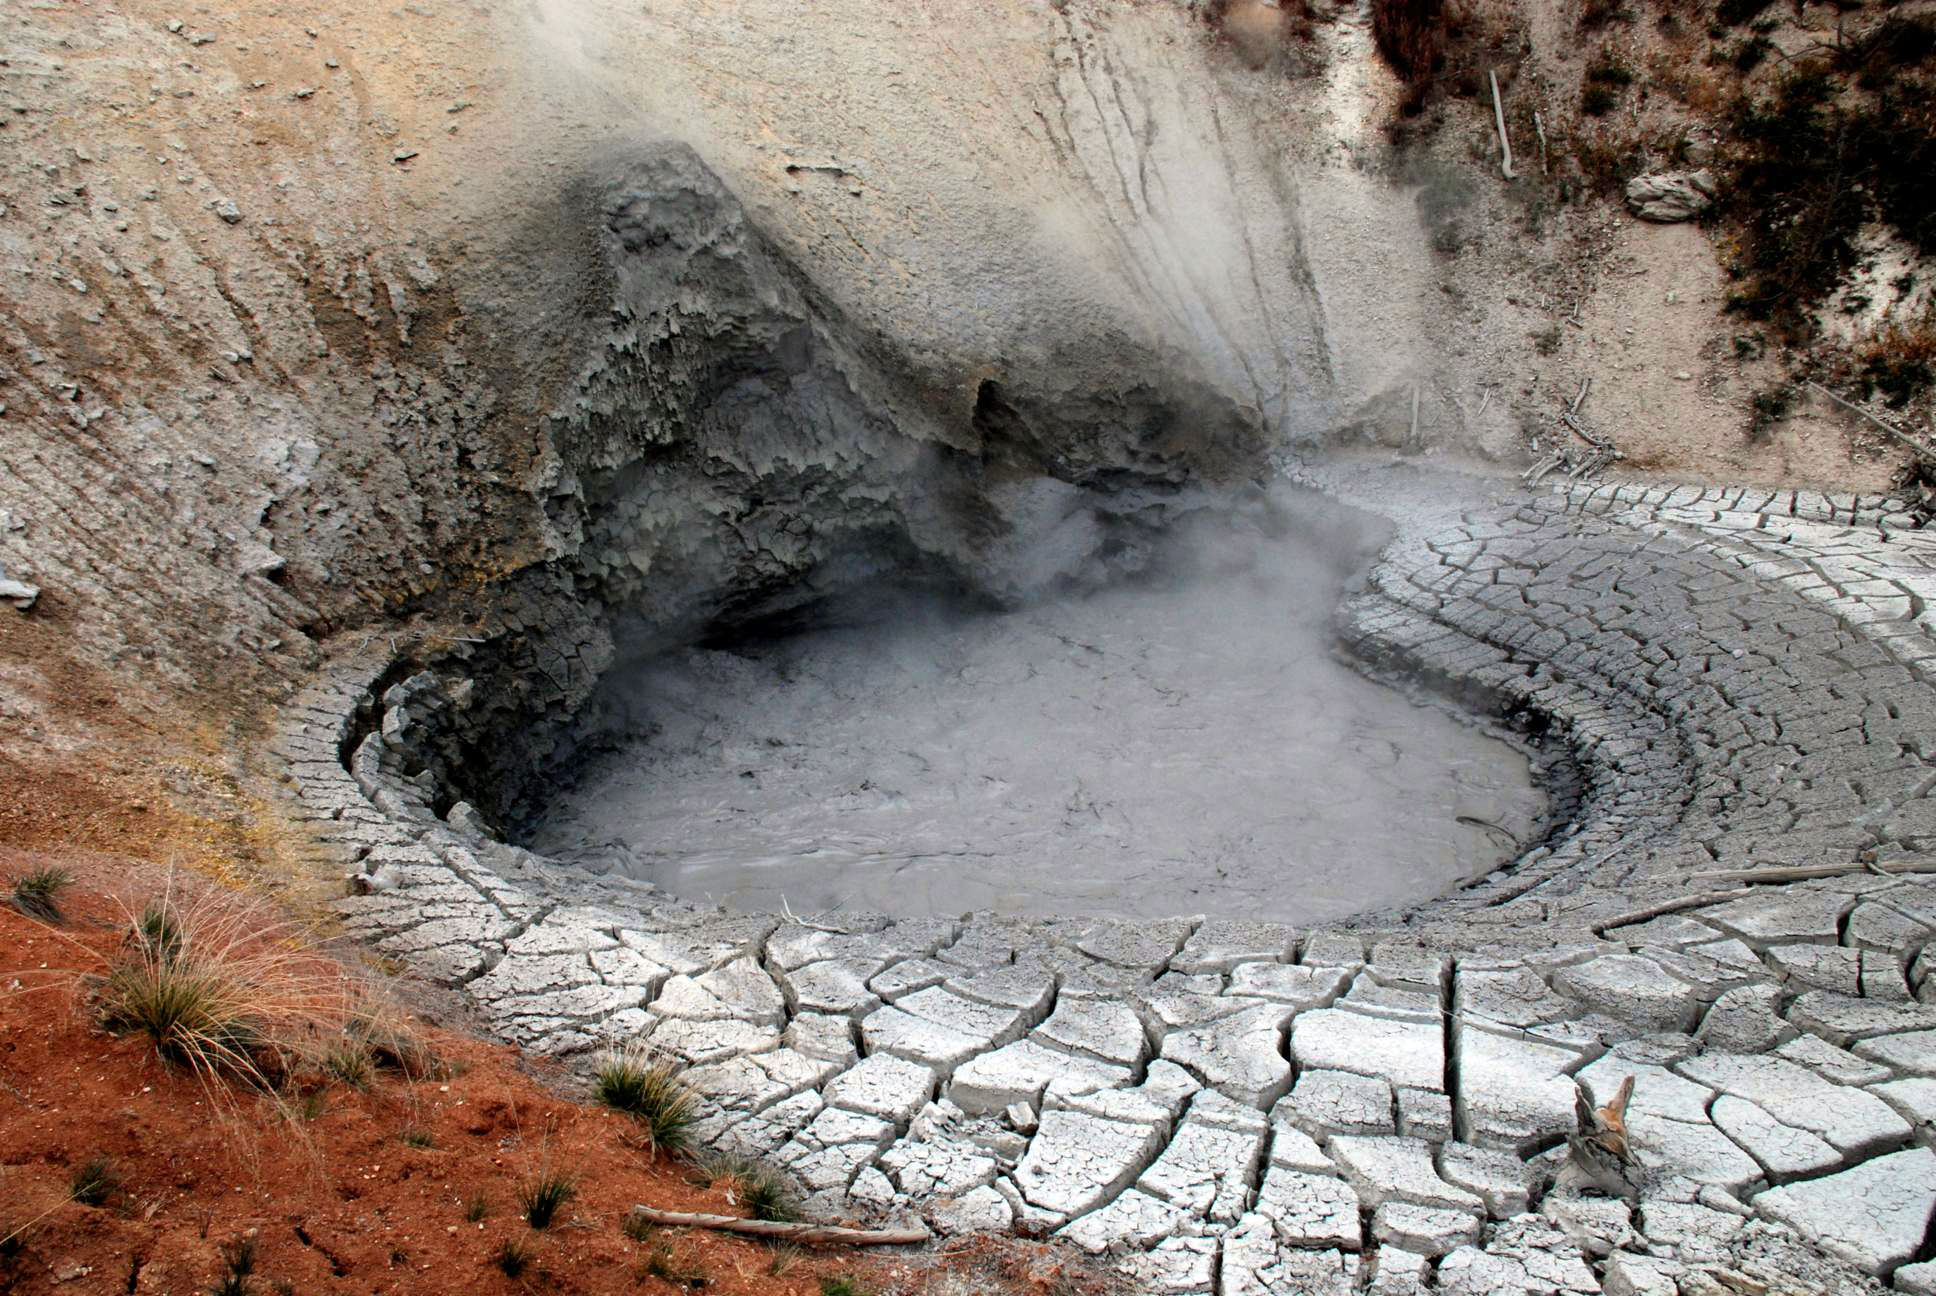 Target 471 is the Mud Volcano in Yellowstone National Park, WY